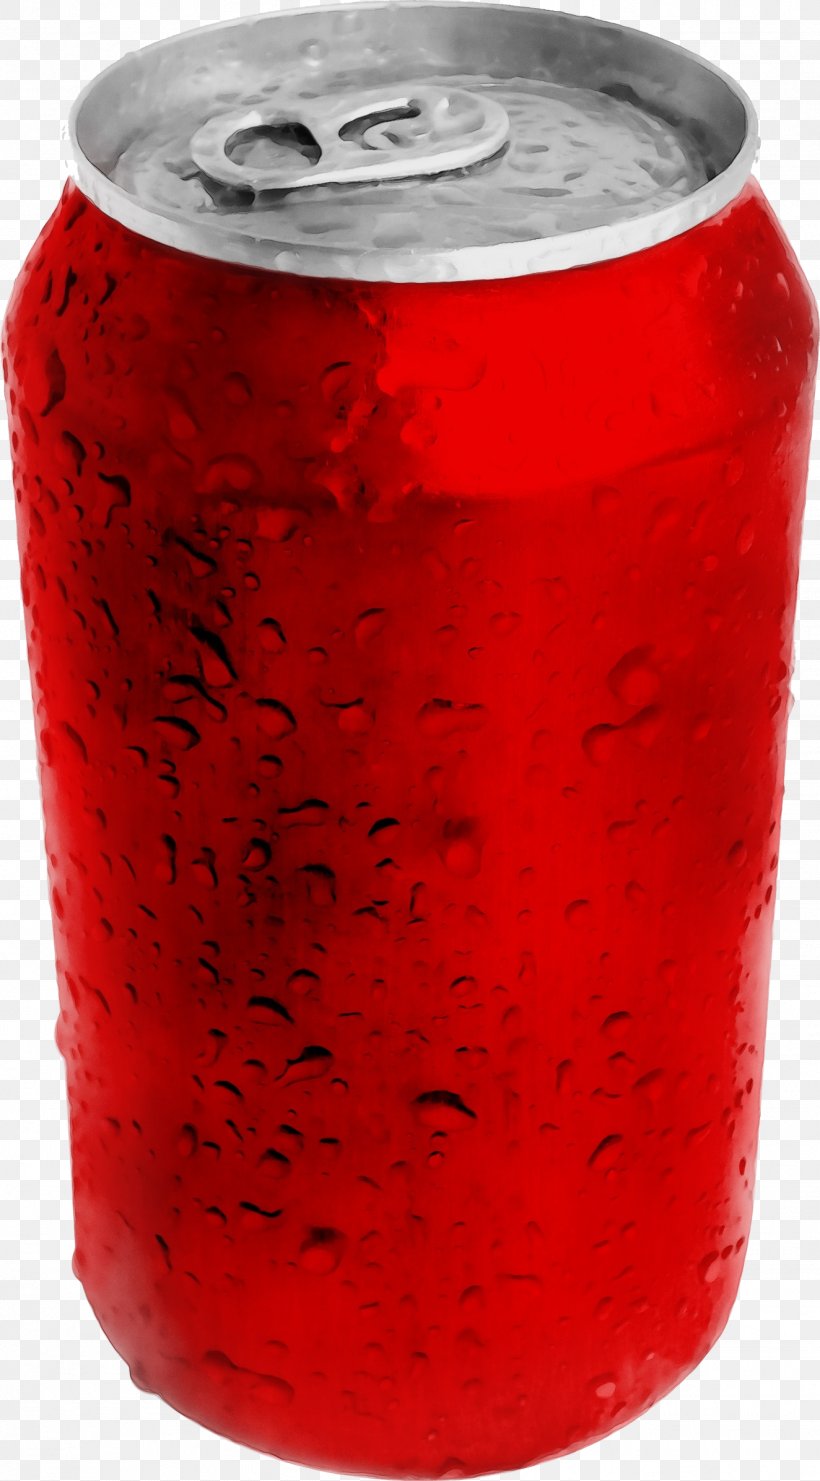 Beverage Can Red Drink Cranberry Juice Non-alcoholic Beverage, PNG, 1324x2392px, Watercolor, Beverage Can, Canning, Cranberry Juice, Drink Download Free